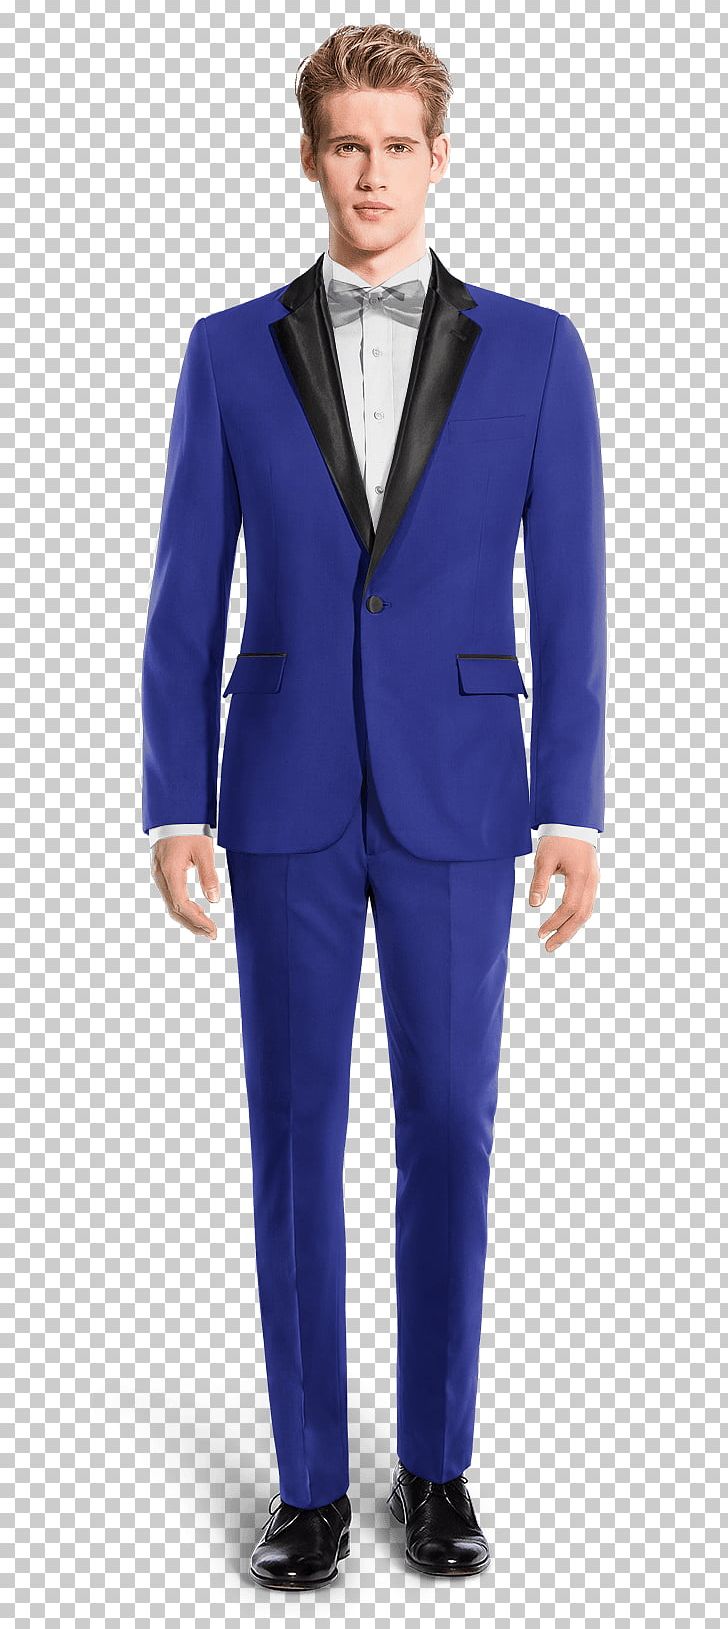 Tuxedo Jacket Suit Pants Smoking PNG, Clipart, Blazer, Blue, Businessperson, Chino Cloth, Cobalt Blue Free PNG Download